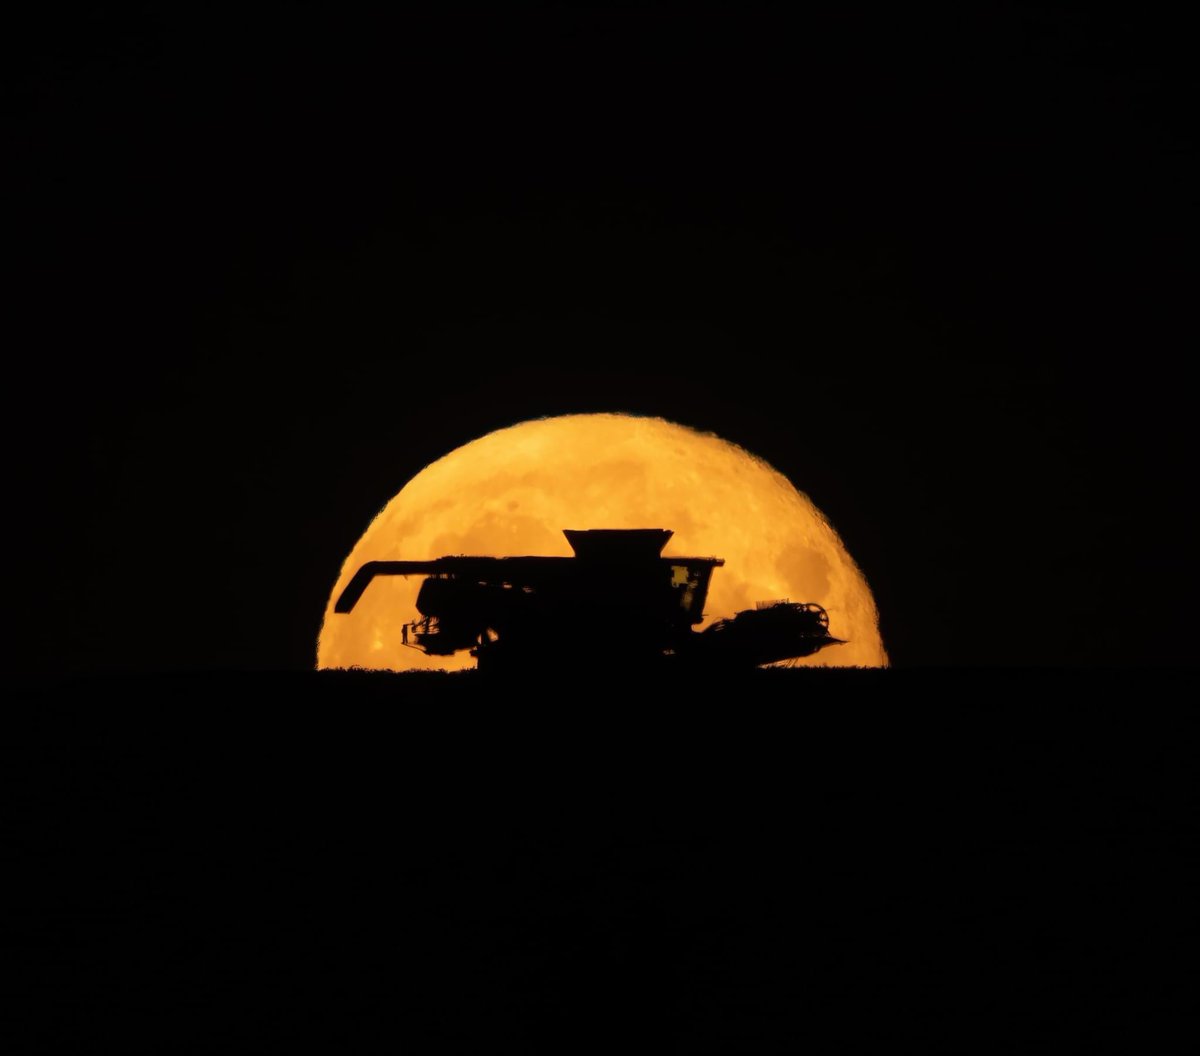 #Marlboroughdowns finished combining yesterday evening. Just over a month of harvesting, and finishing nearly three weeks earlier than normal. With huge thanks to the great team we have helping us. The combine silhouetted in the rising Full moon yesterday evening. Harvest home!.